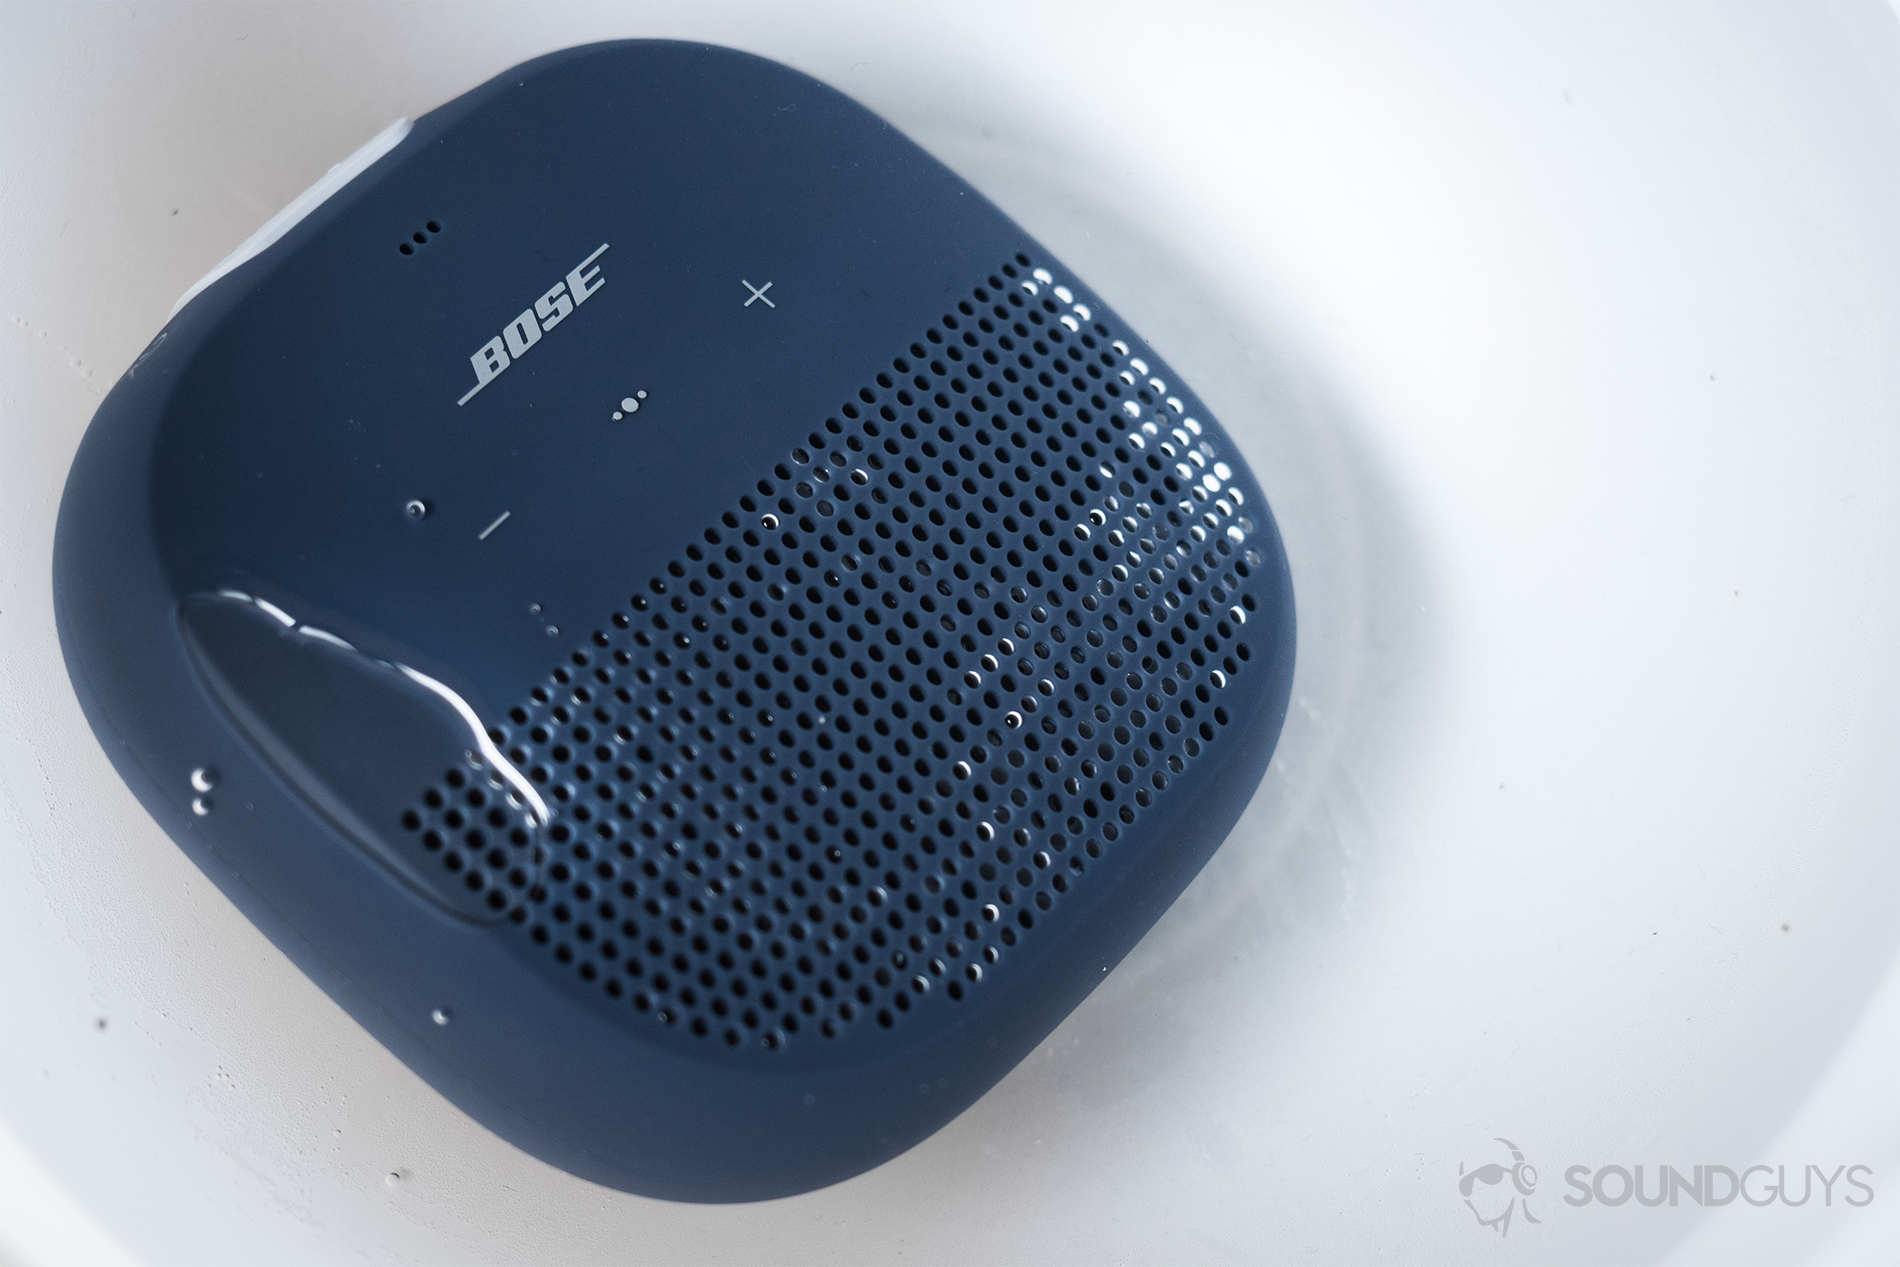 The Bose SoundLink Micro (blue) underwater (white background)